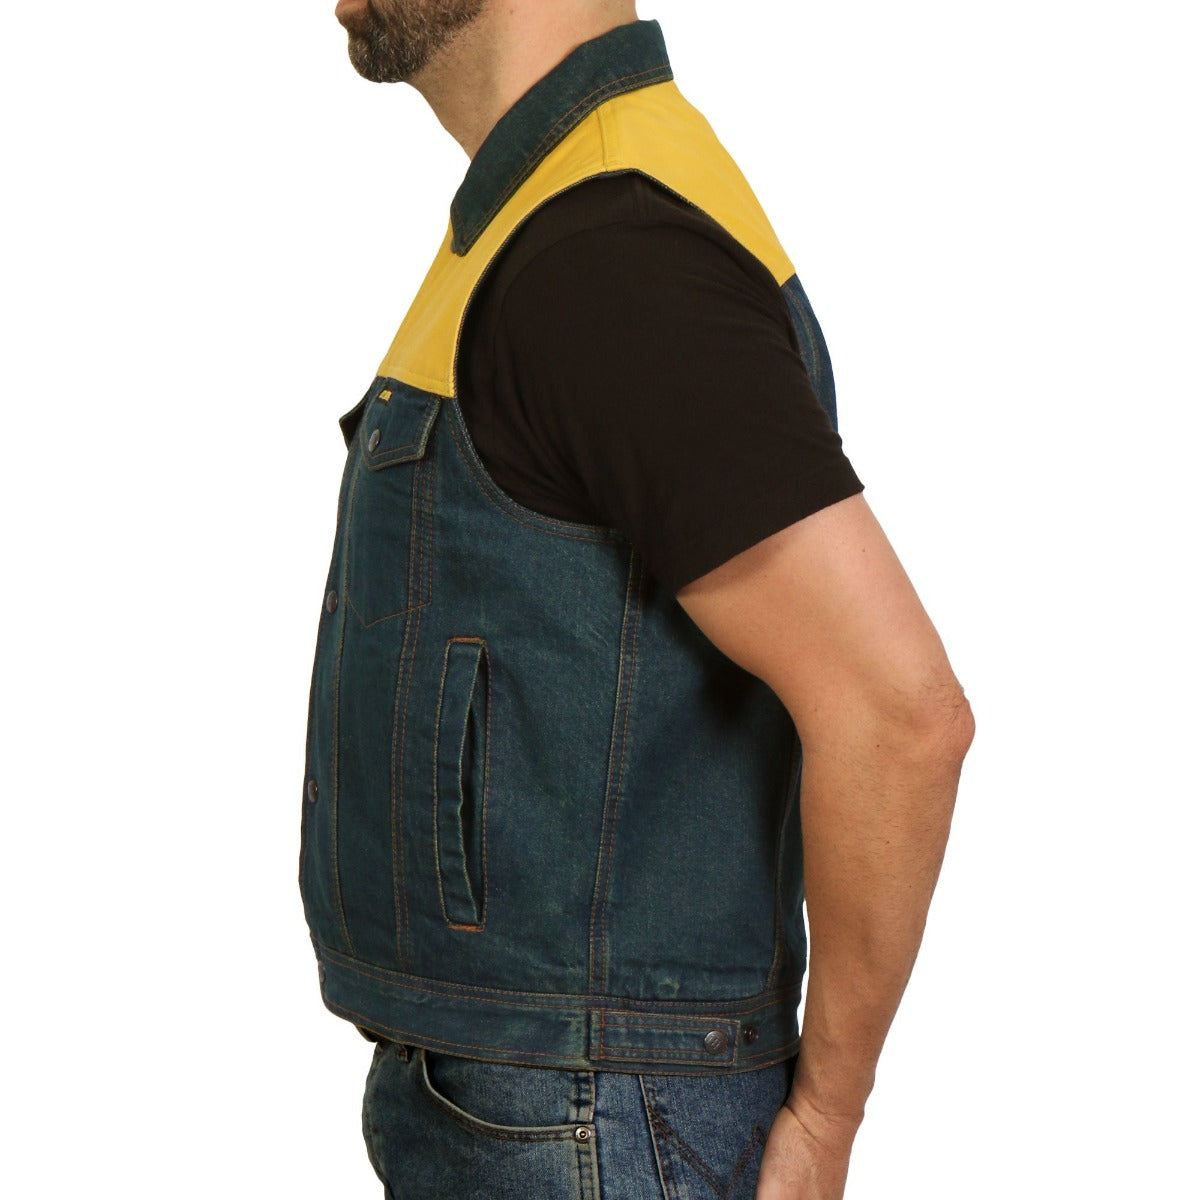 Hot Leathers Men's Leather And Denim Conceal Carry Vest